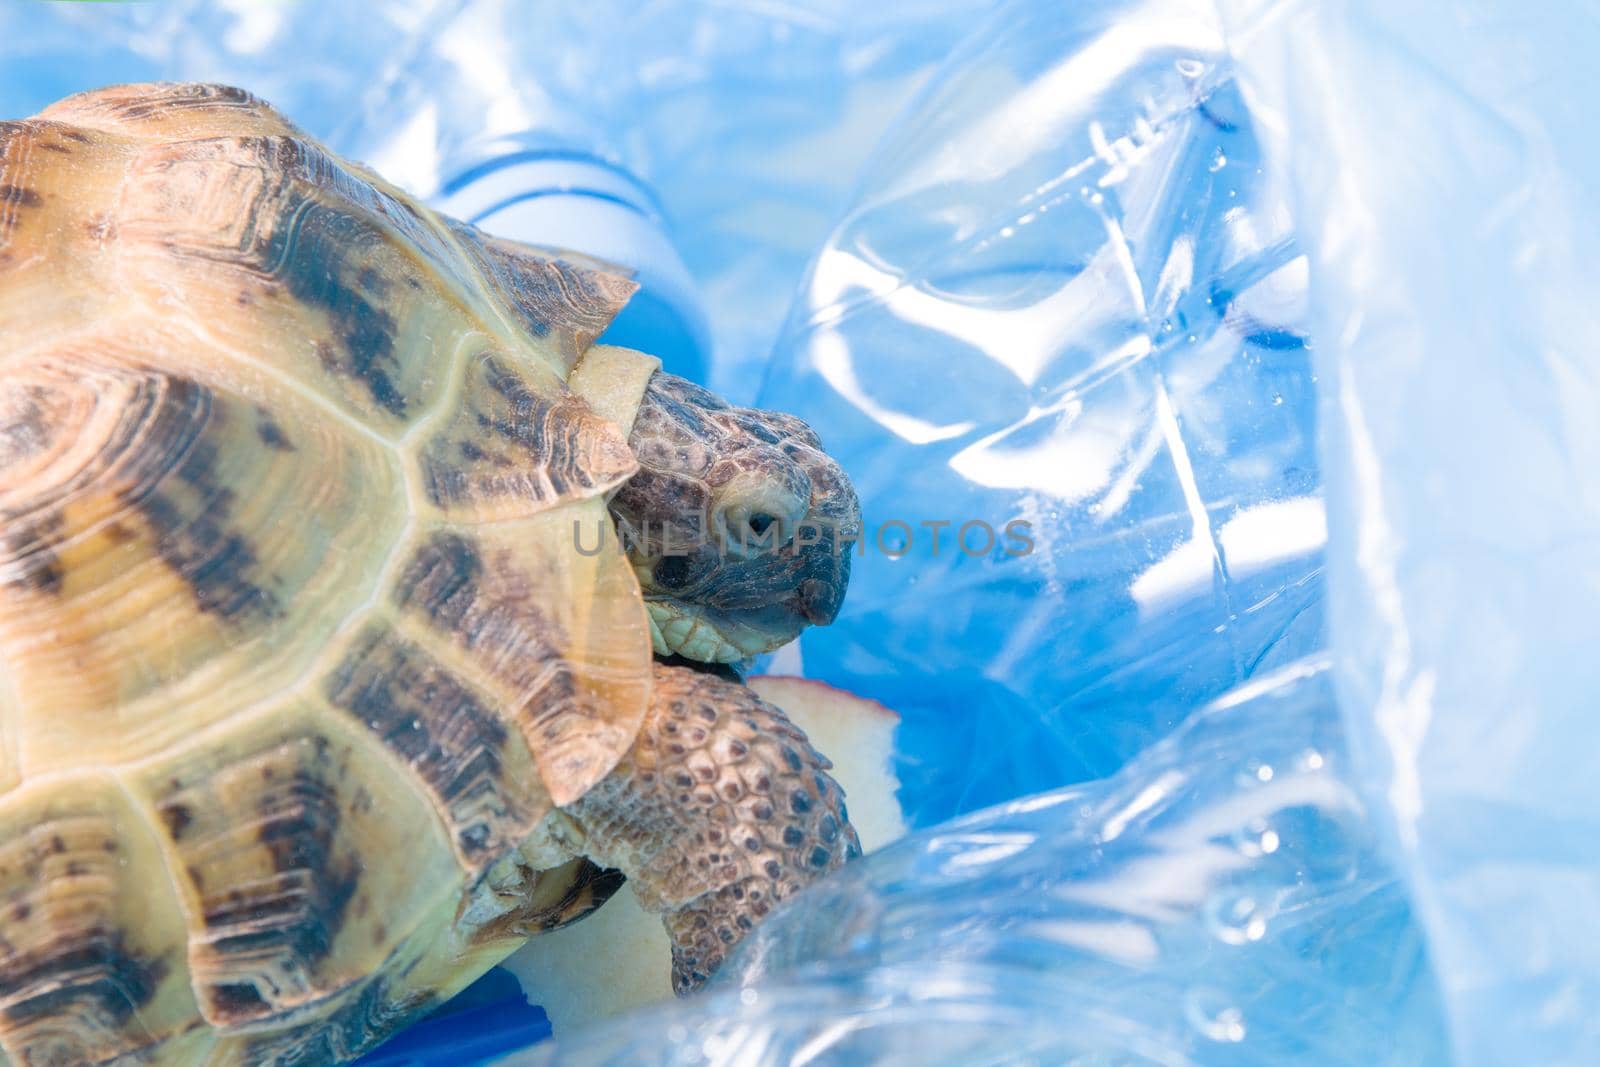 land Central Asian tortoise in a pile of plastic waste, by natashko